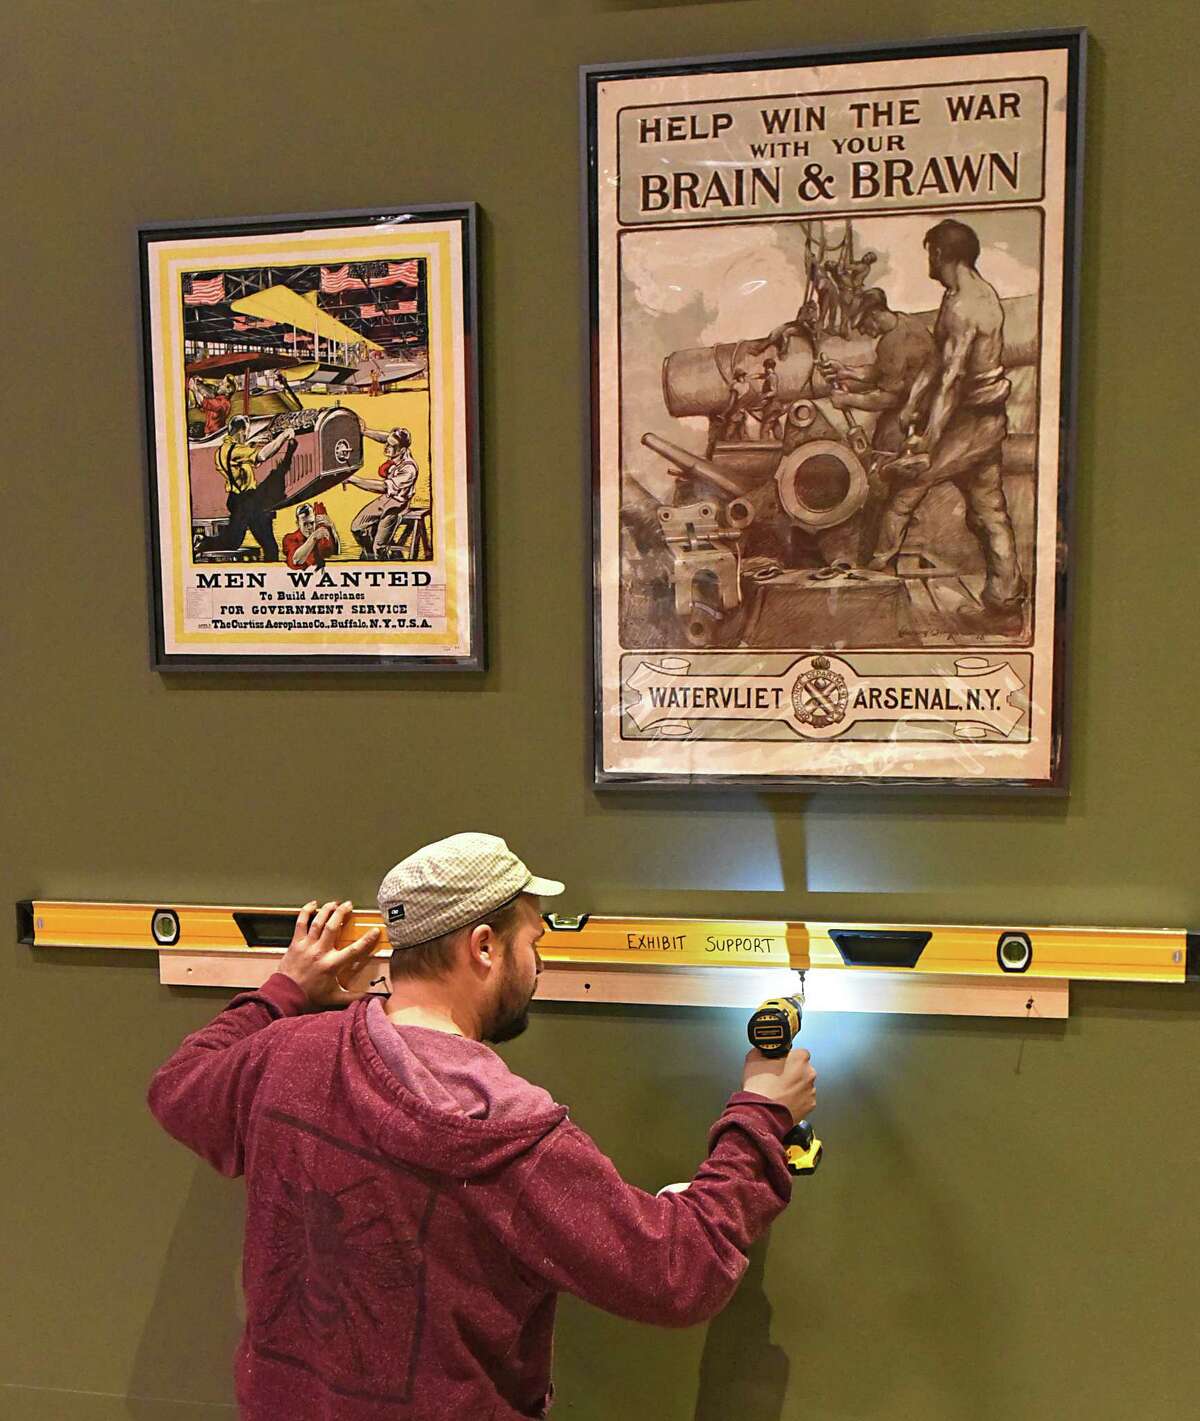 Museum and Exhibit Specialist Ethan Hacklin sets up an exhibit at the State Museum in Albany, N.Y., on Thursday, March 30, 2017, commemorating the 100 years since the US entered World War I. (Lori Van Buren / Times Union)